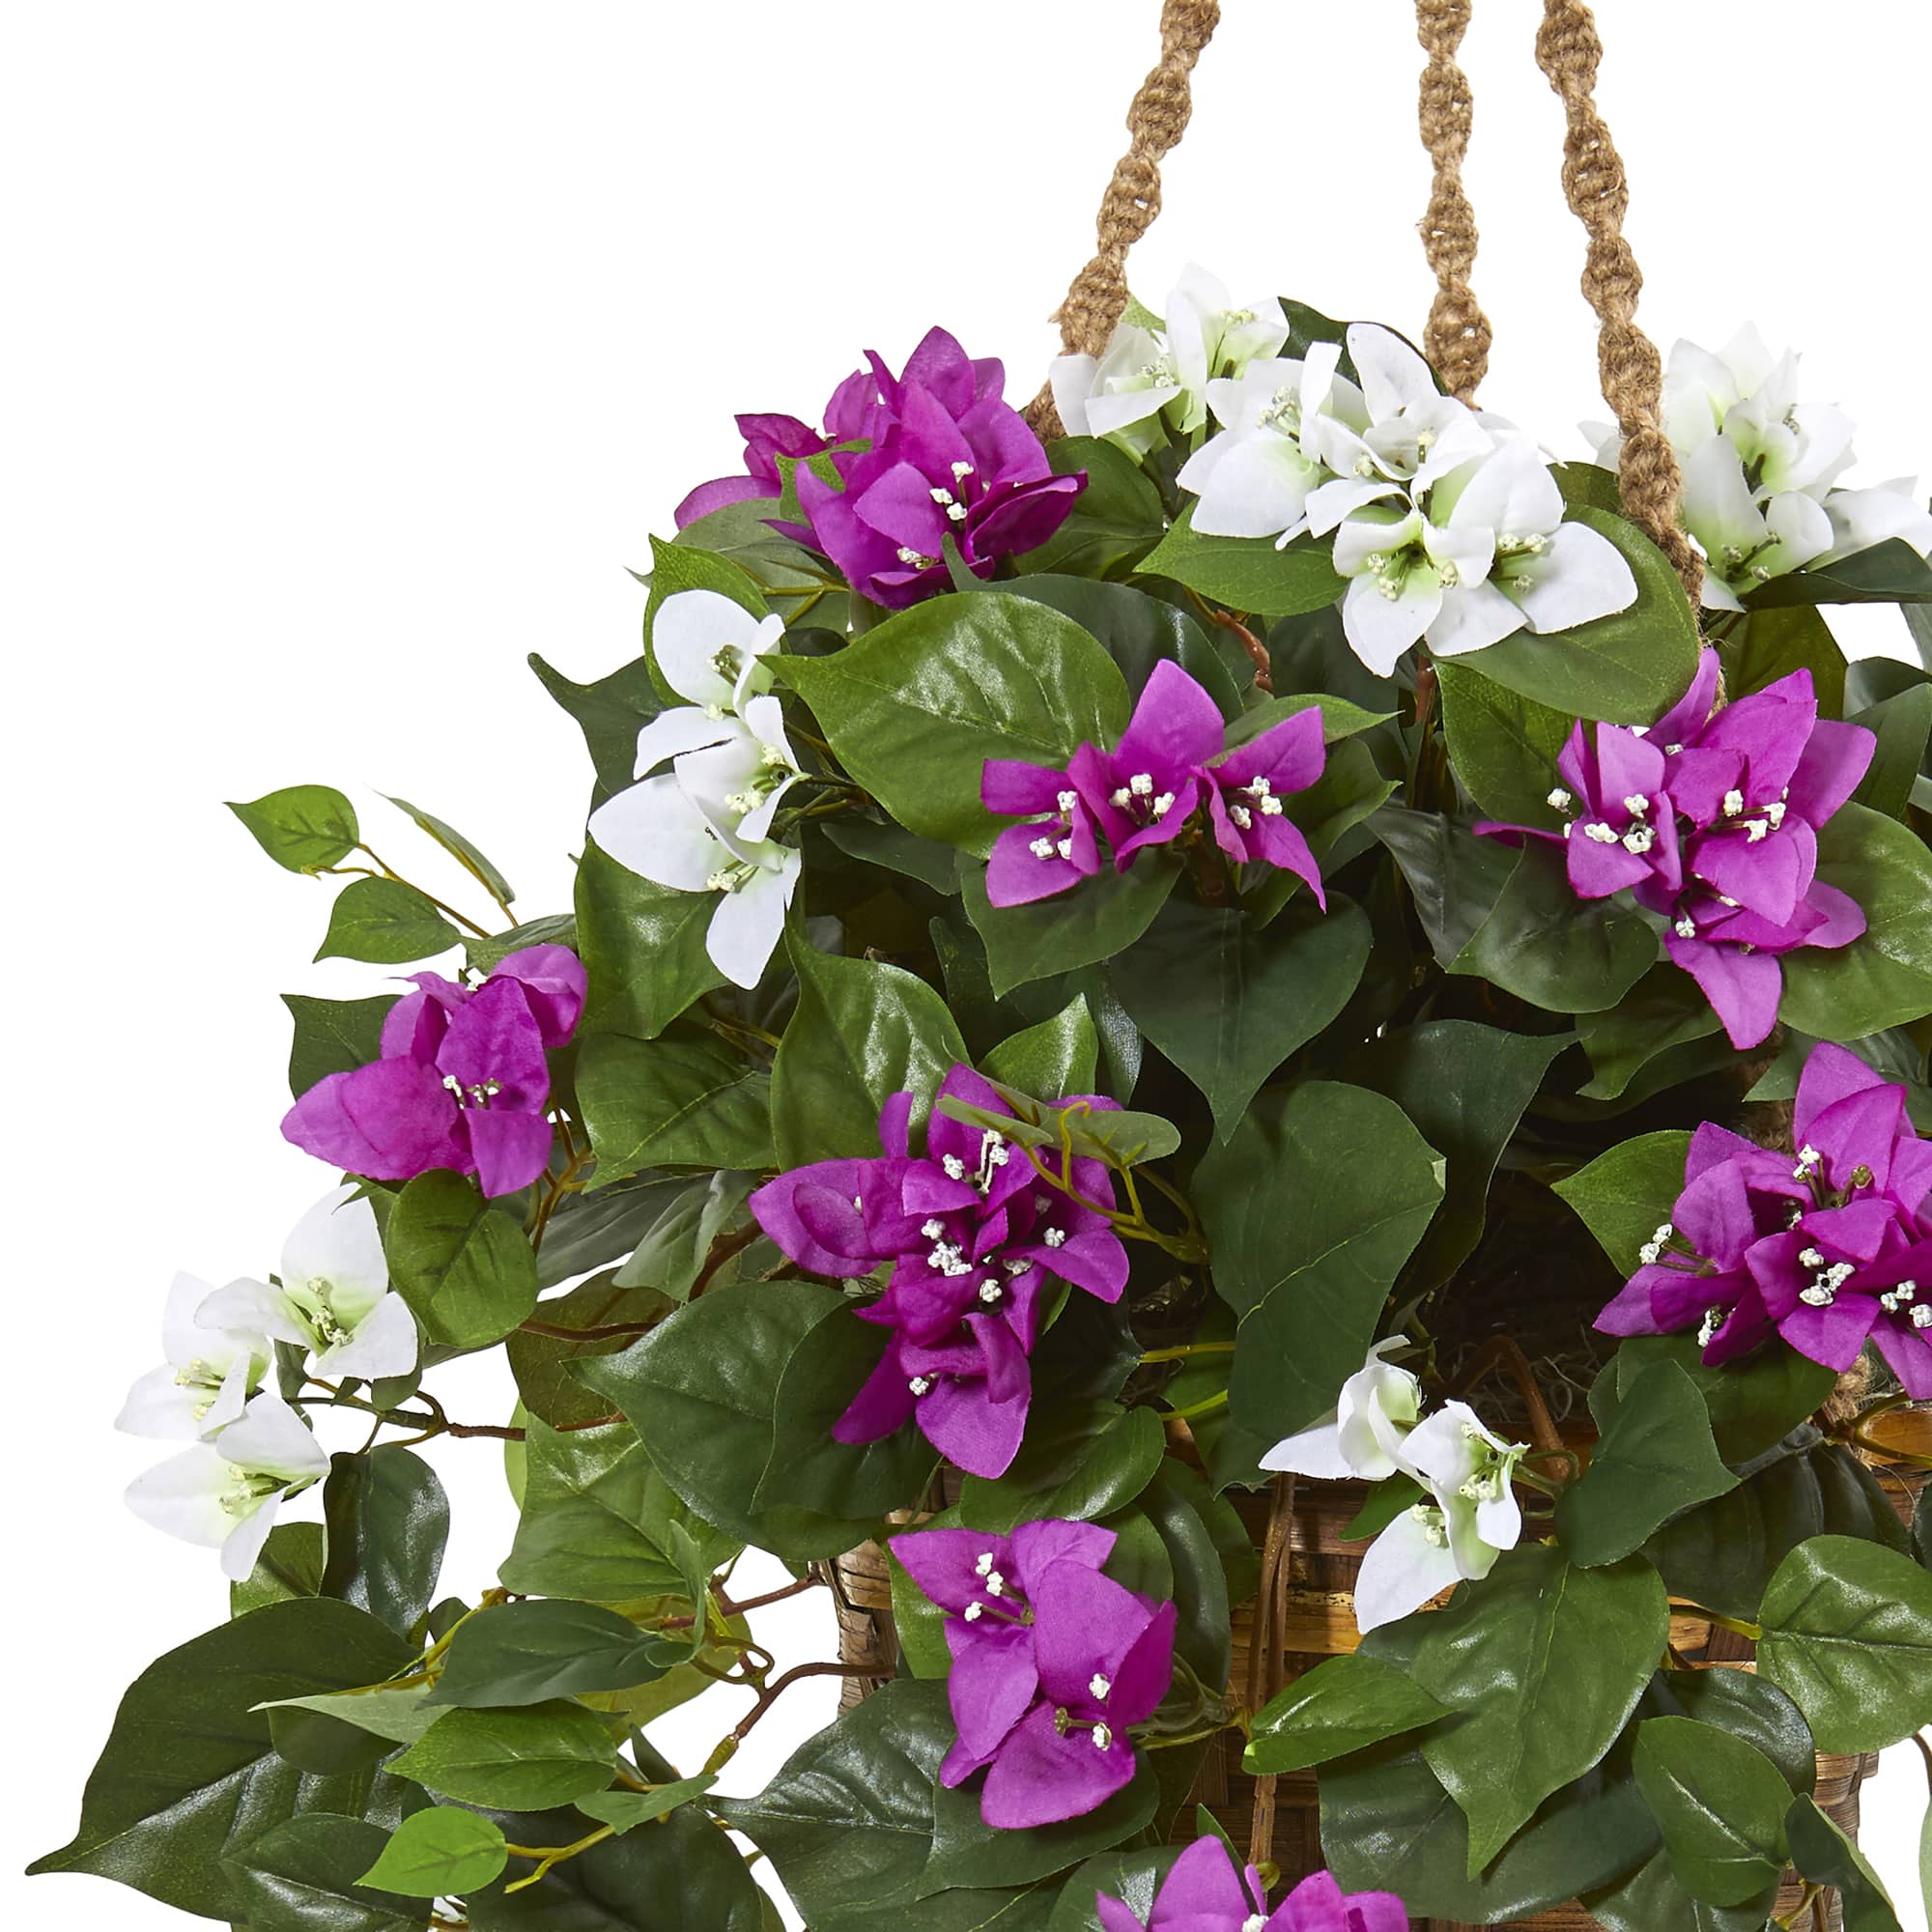 2.5ft. Mixed Bougainvillea in Hanging Basket